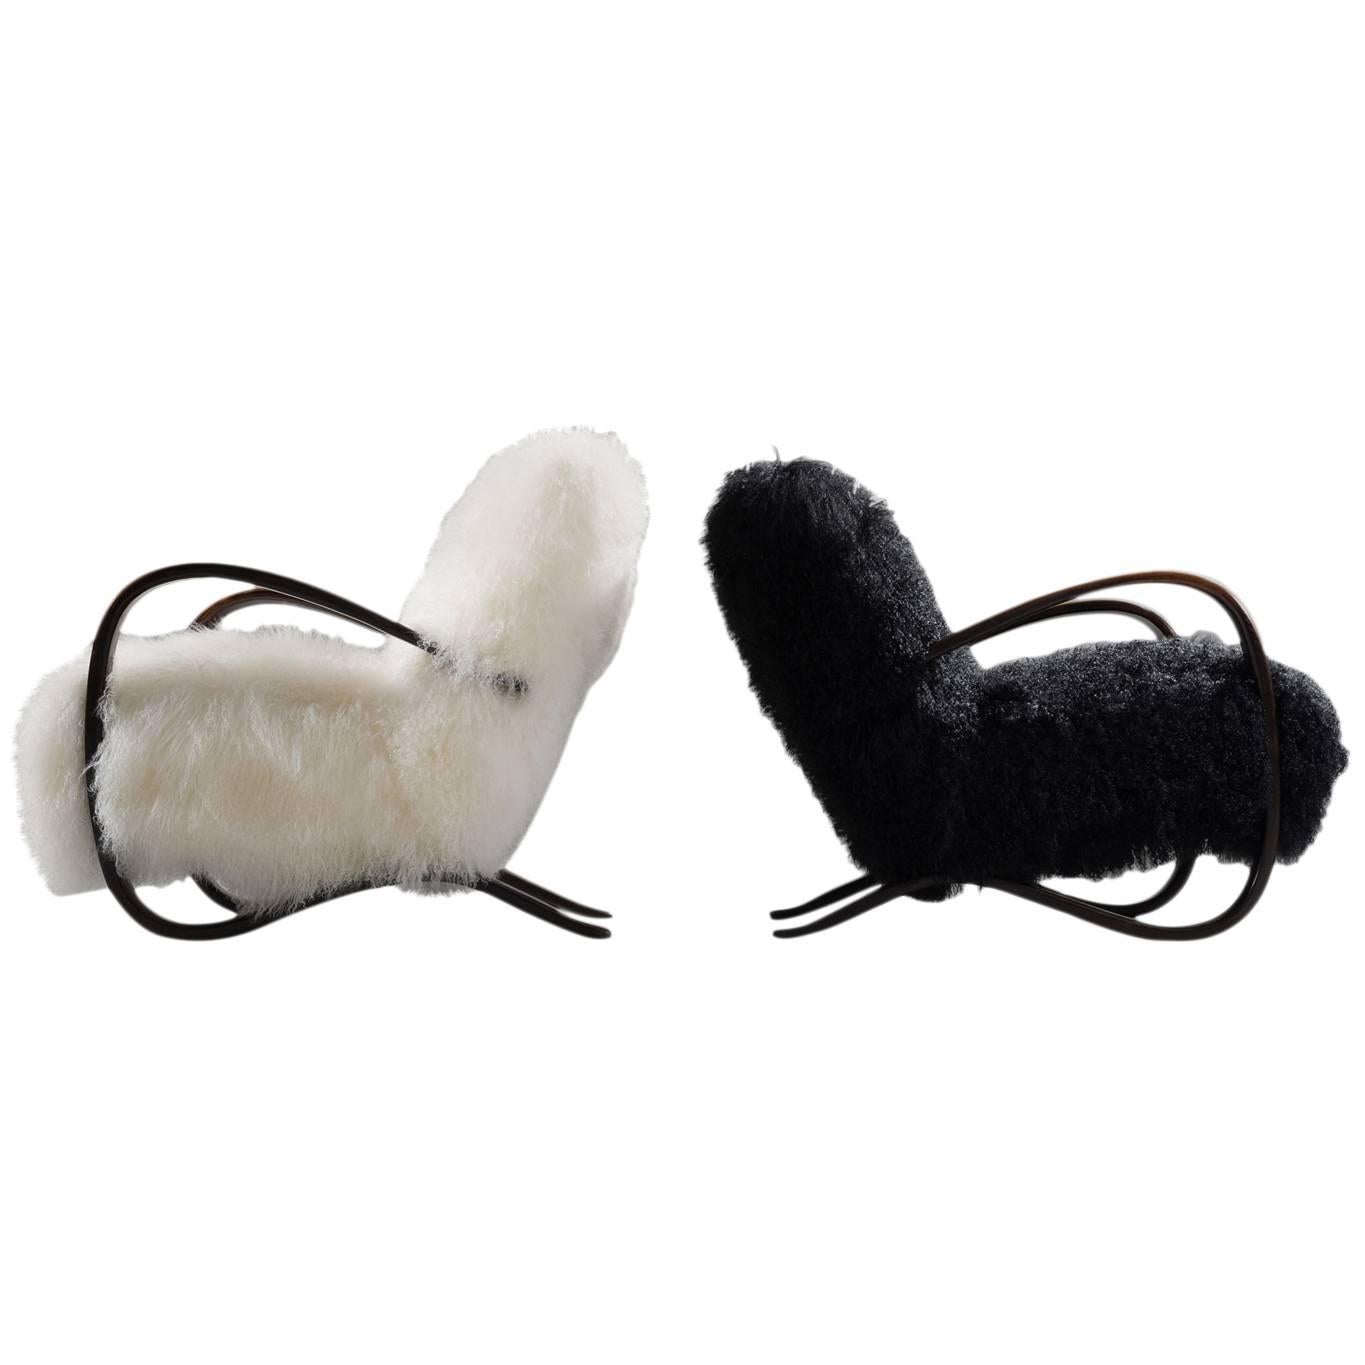 Pair of lounge chairs, in beech and sheepskin, by Jindrich Halabala (1903-1978), Czech Republic, 1930s. 

Extraordinary pair of black an white easy chairs with Tibetan lambswool upholstery. These chairs have a very dynamic and abundant appearance.